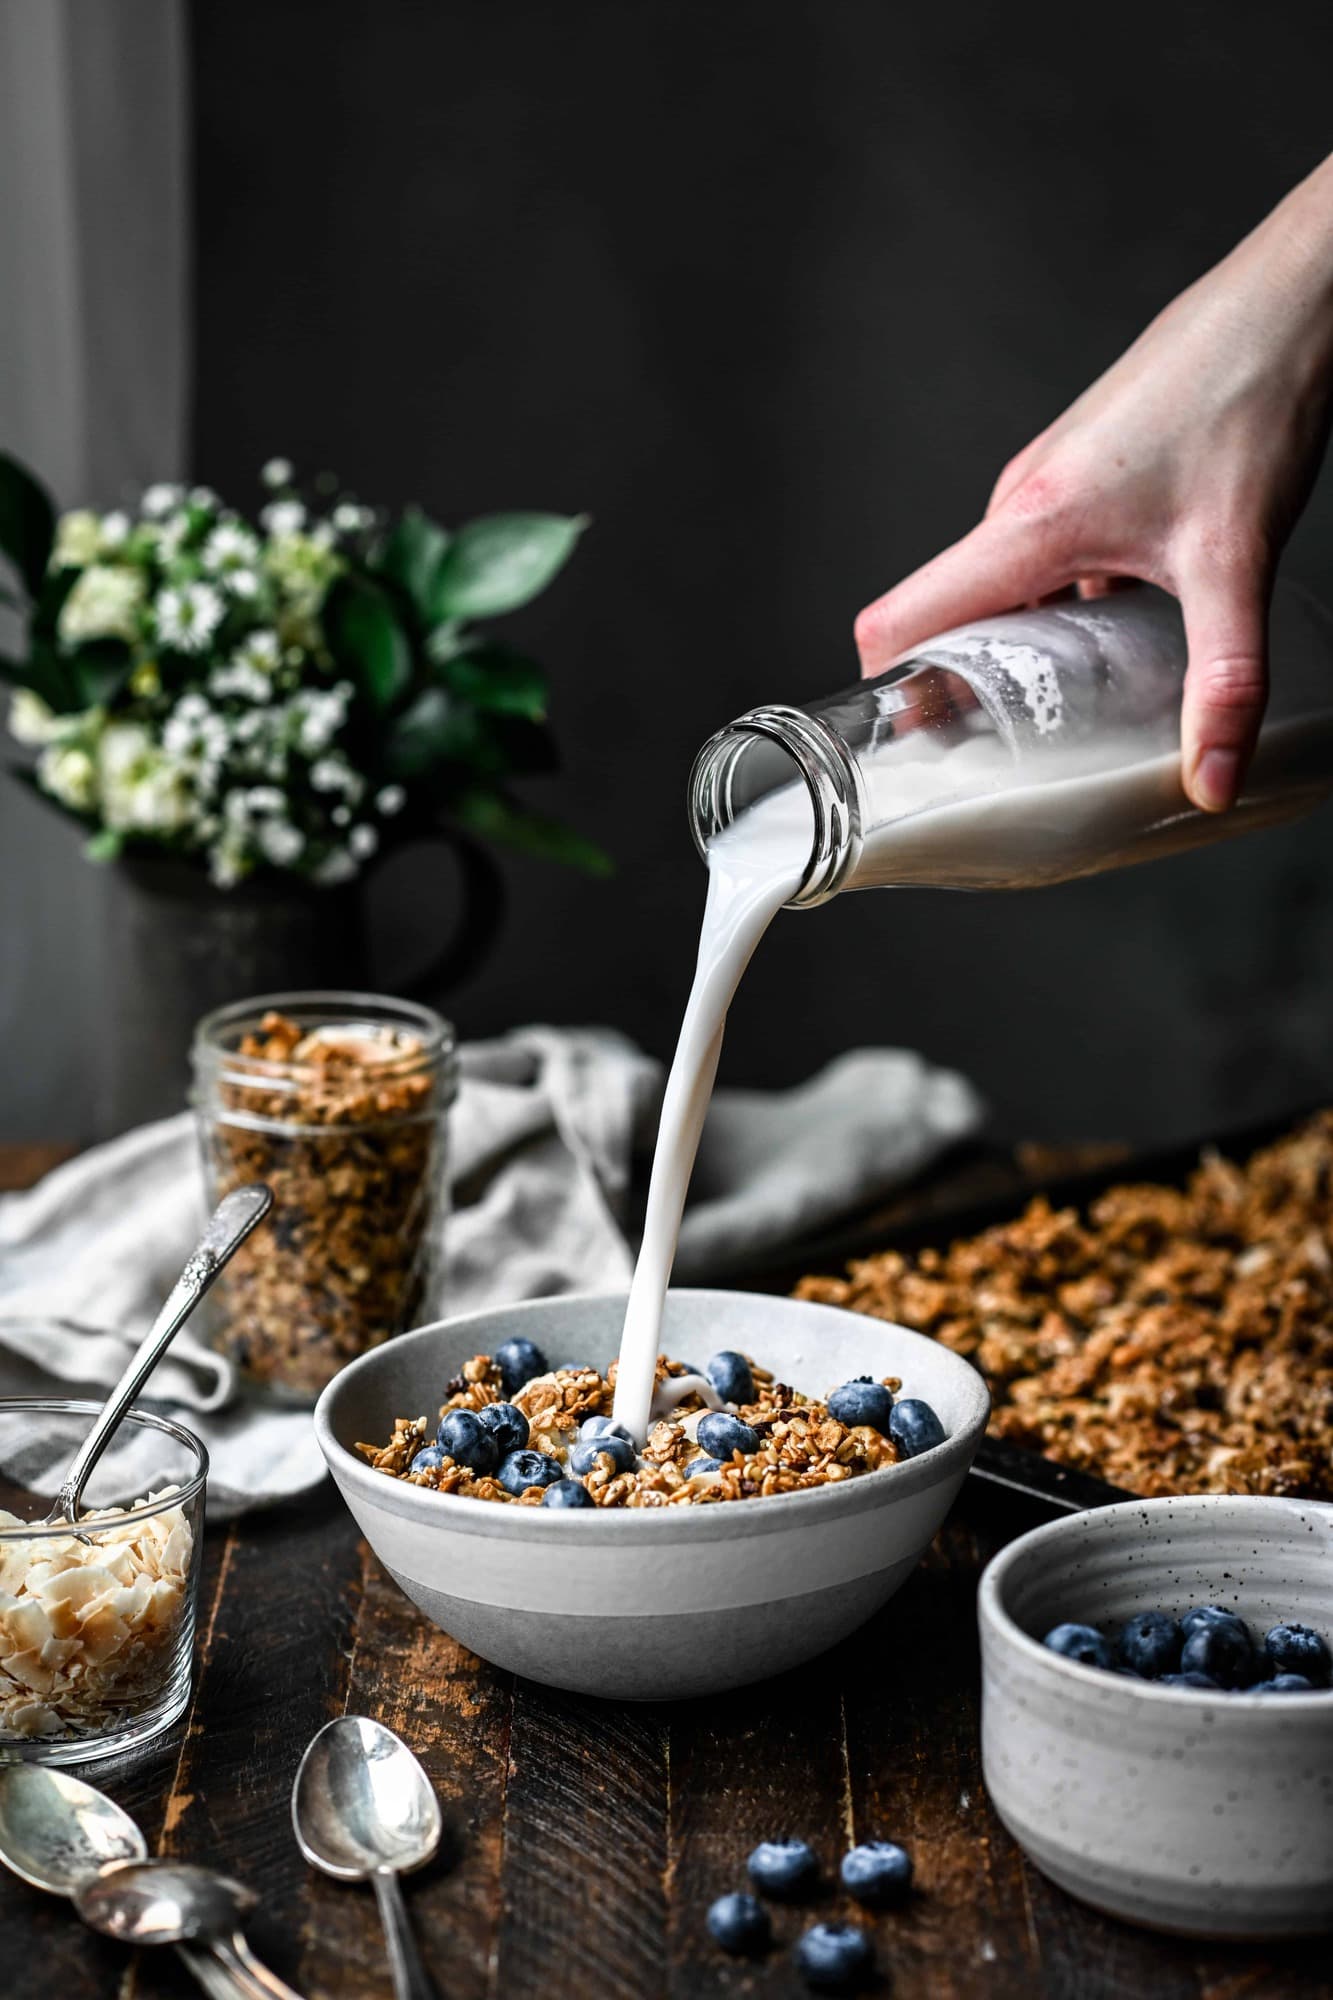 Pouring milk into a bowl of granola and blueberries on a wood table